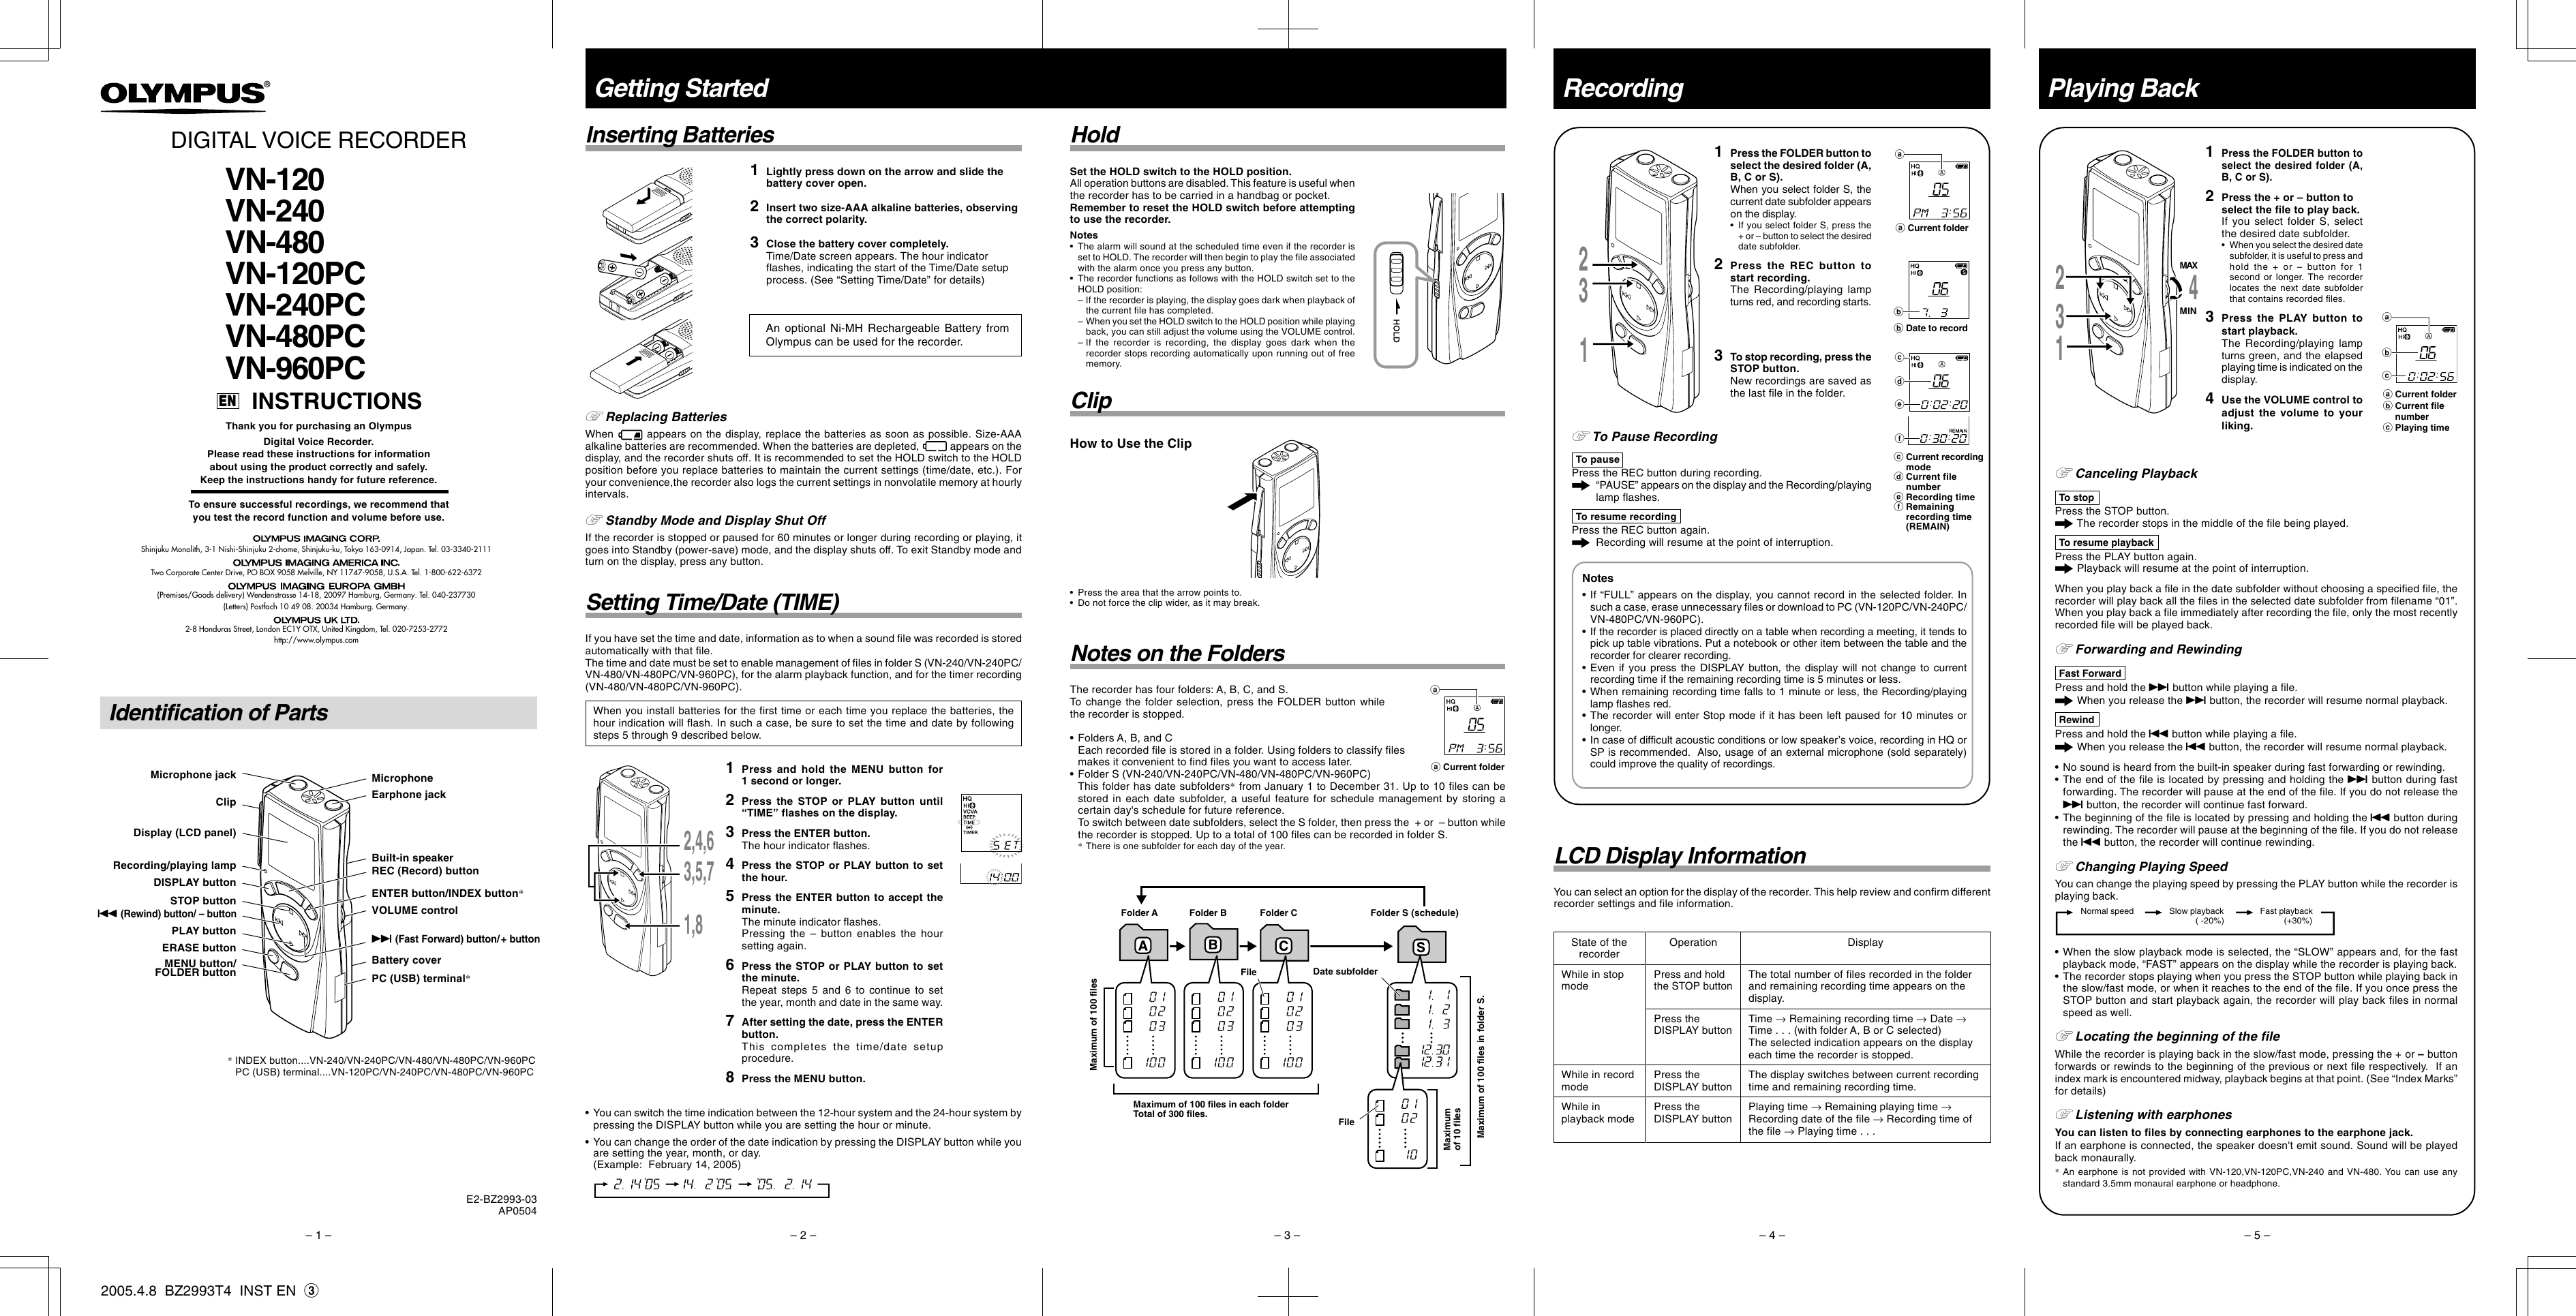 Page 1 of 2 - Olympus Vn-480Pc-Instructions VN-120_VN-120PC_VN-240_VN-240PC_VN-480_VN-480PC_VN-960PC_Instruction_Manual_EN